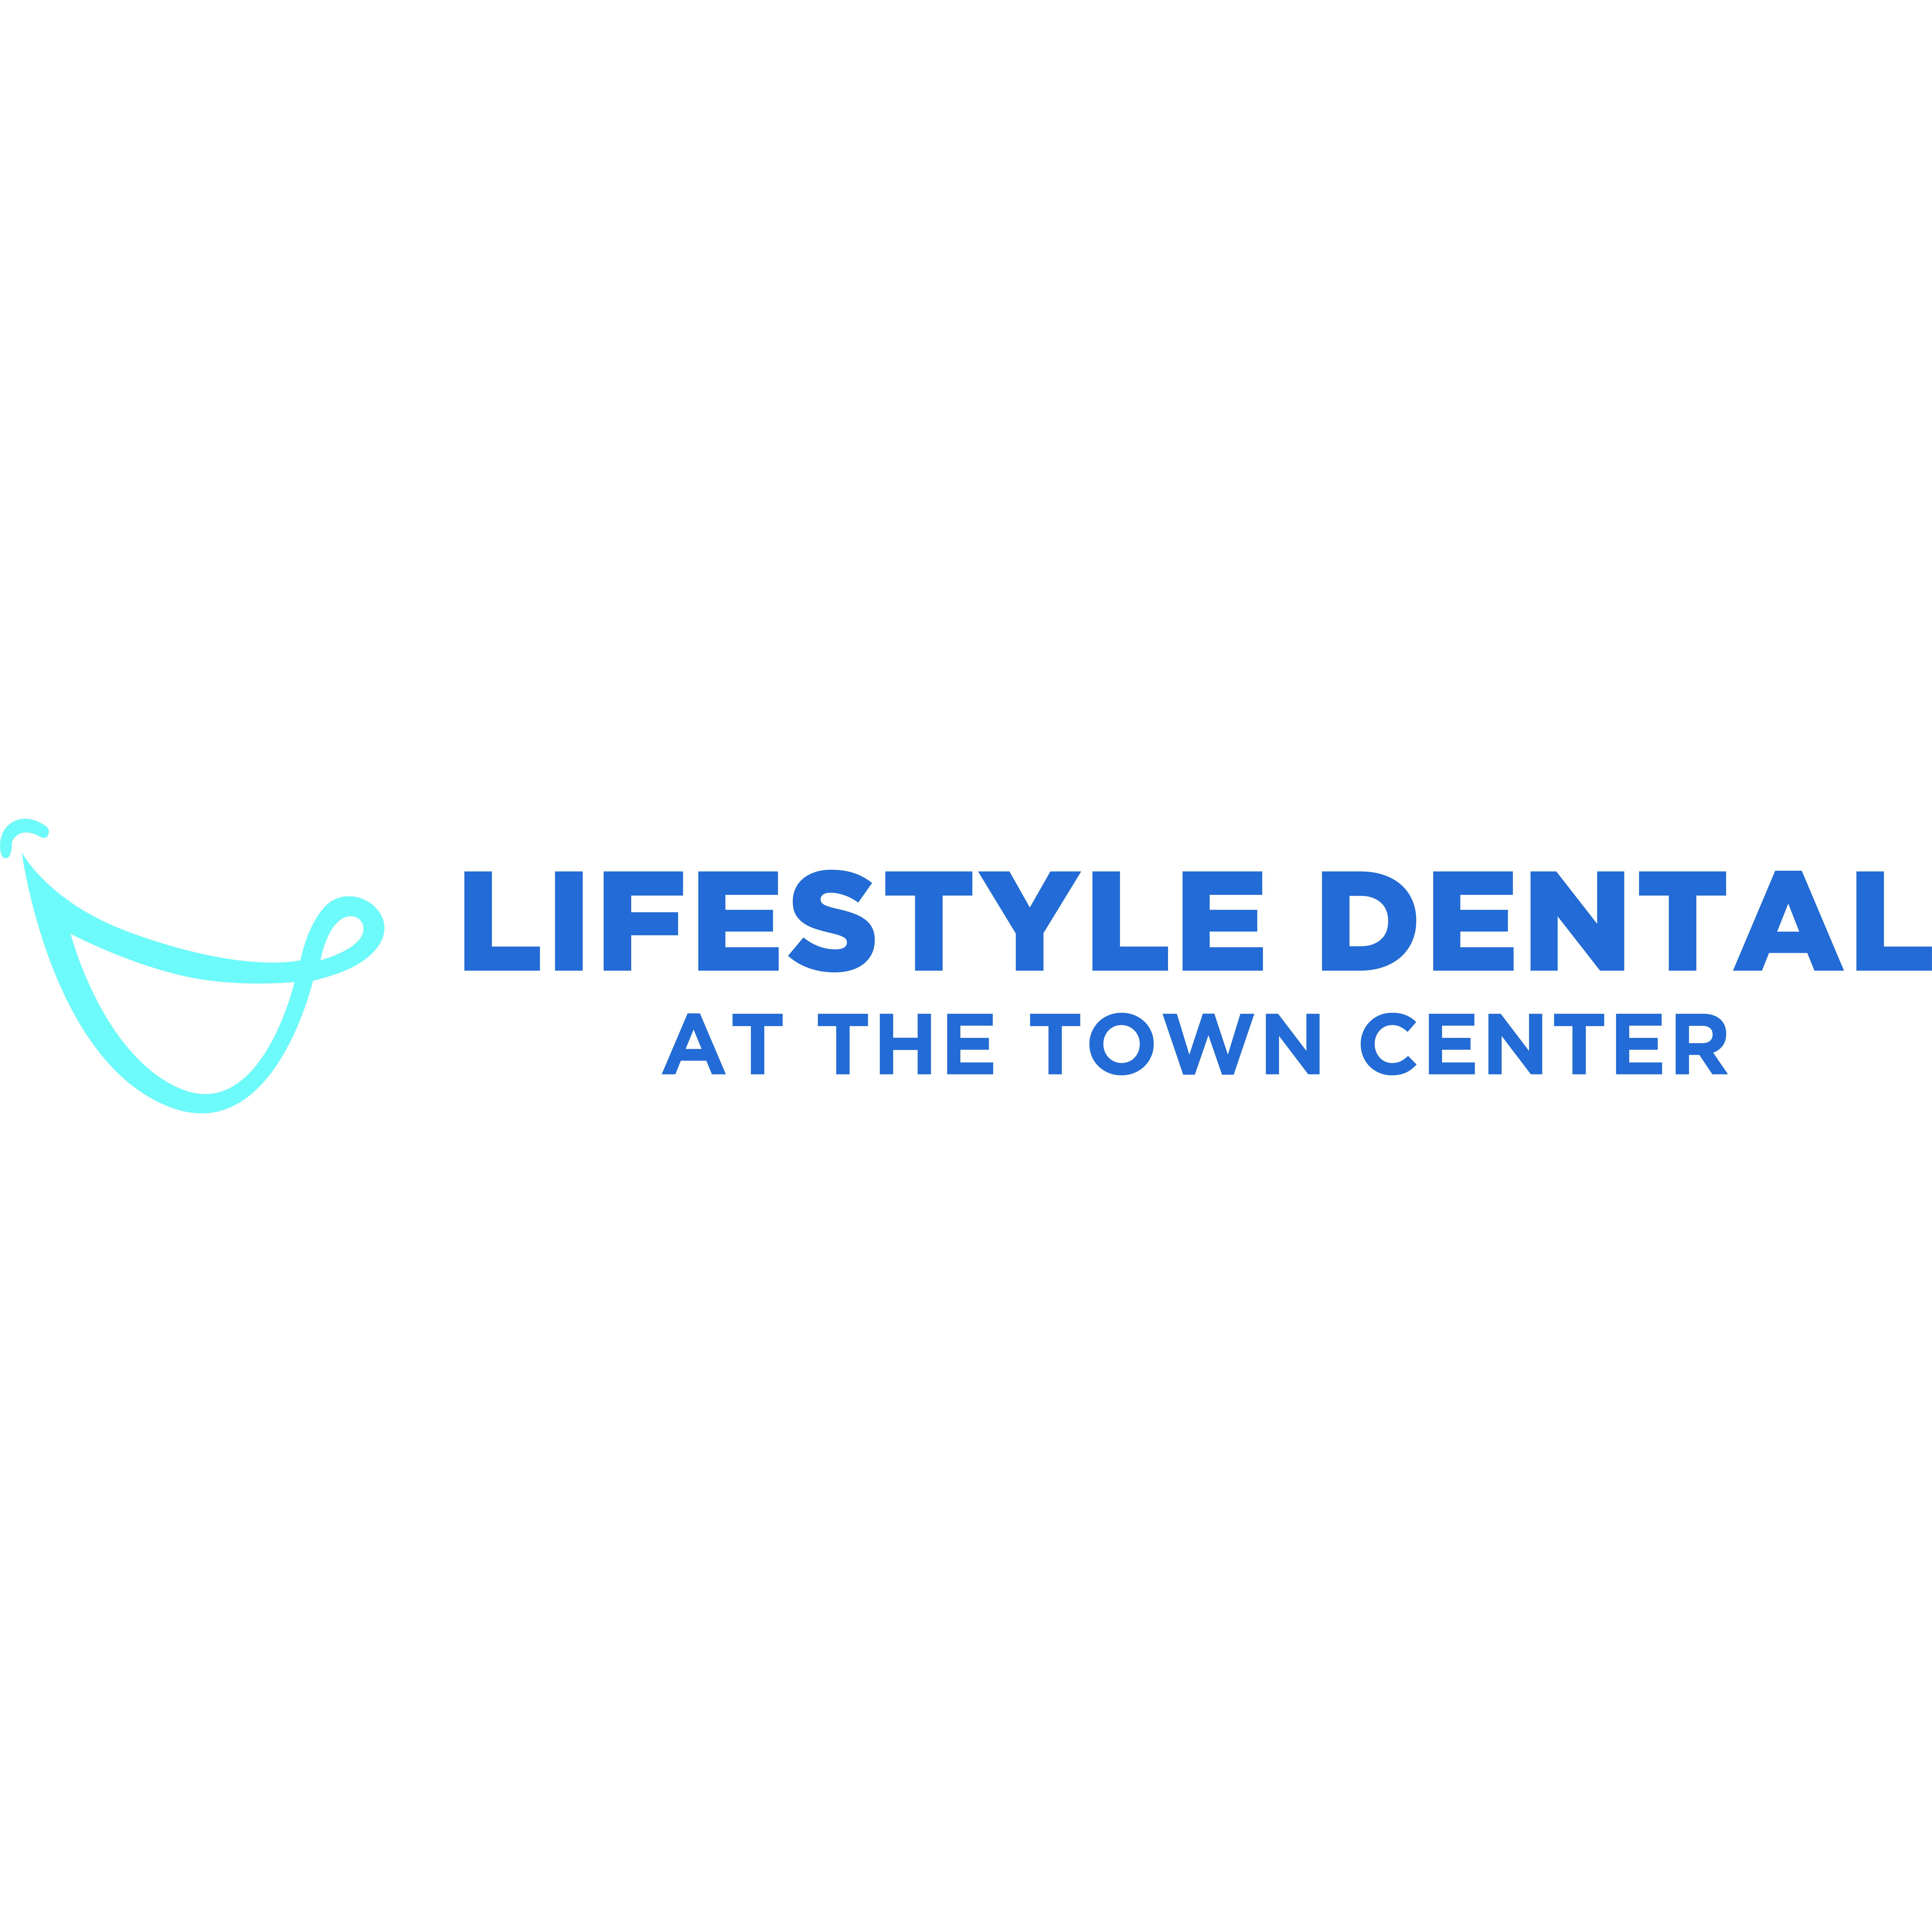 Lifestyle Dental at The Town Center